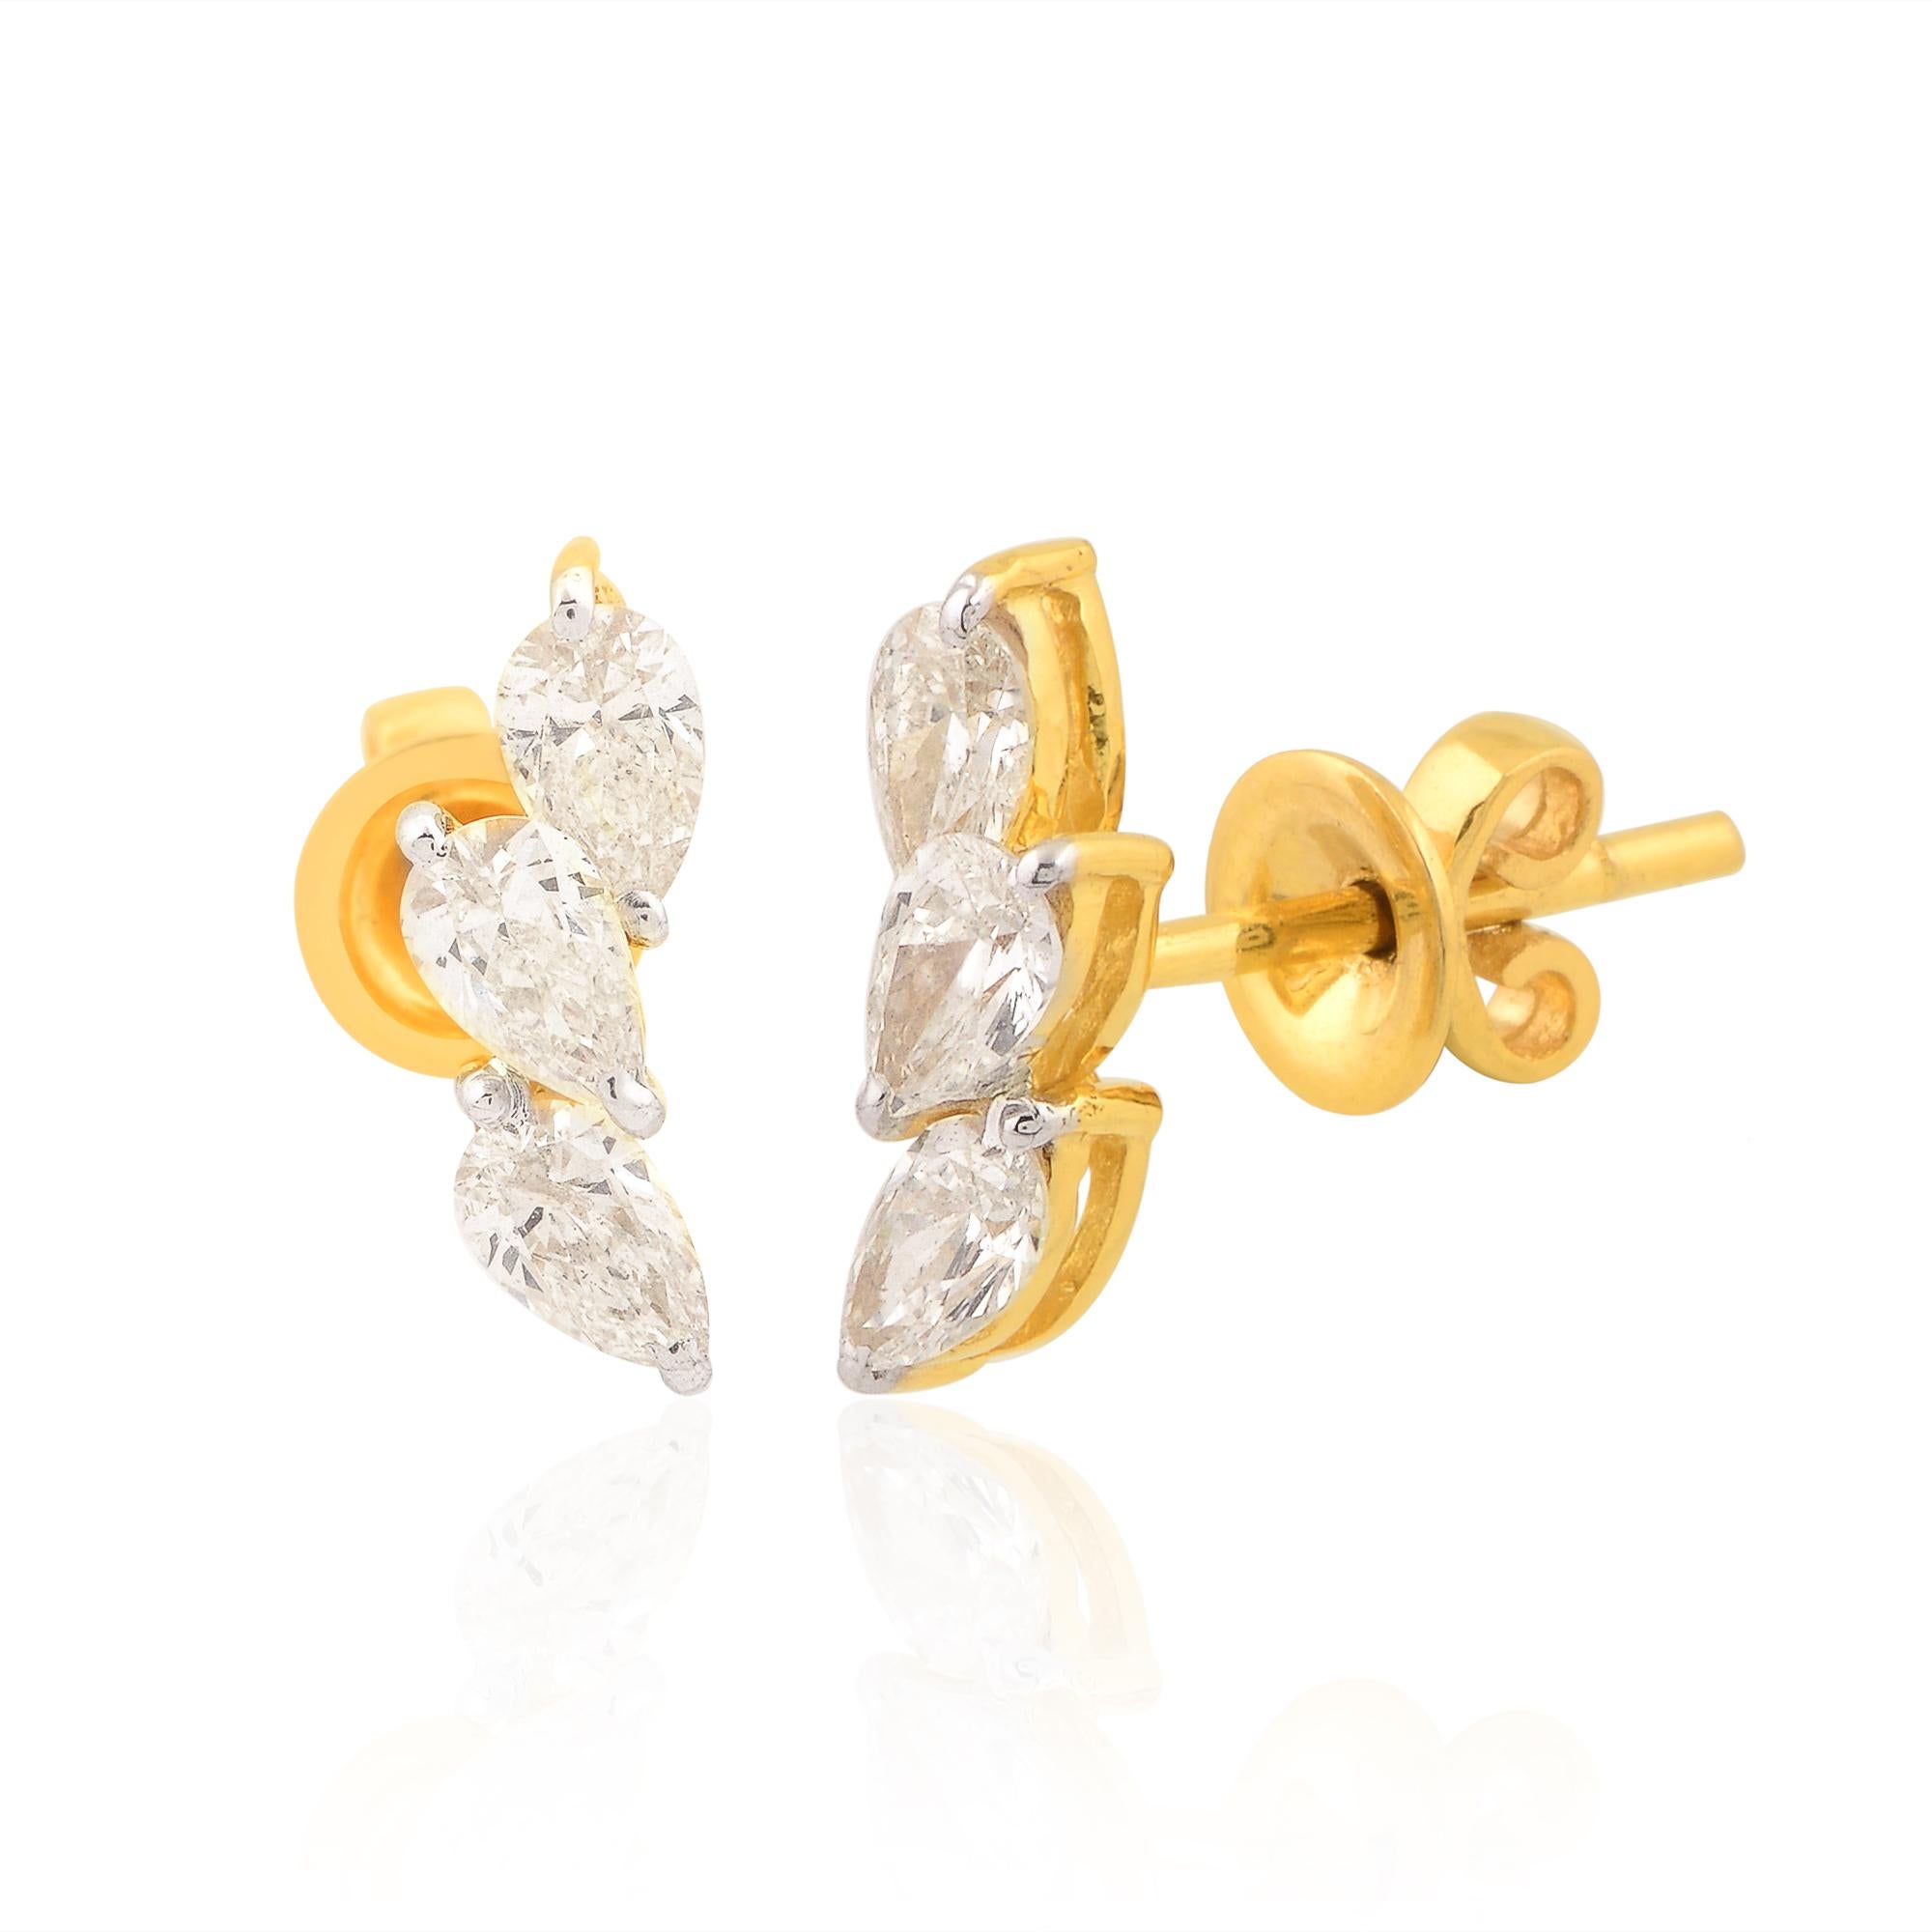 Item Code :- SEE-11097
Gross Weight :- 2.01 gm
18k Yellow Gold Weight :- 1.83 gm
Diamond Weight :- 0.92 carat  ( AVERAGE DIAMOND CLARITY SI1-SI2 & COLOR H-I )
Earrings Length :- 12 mm approx.
✦ Sizing
.....................
We can adjust most items